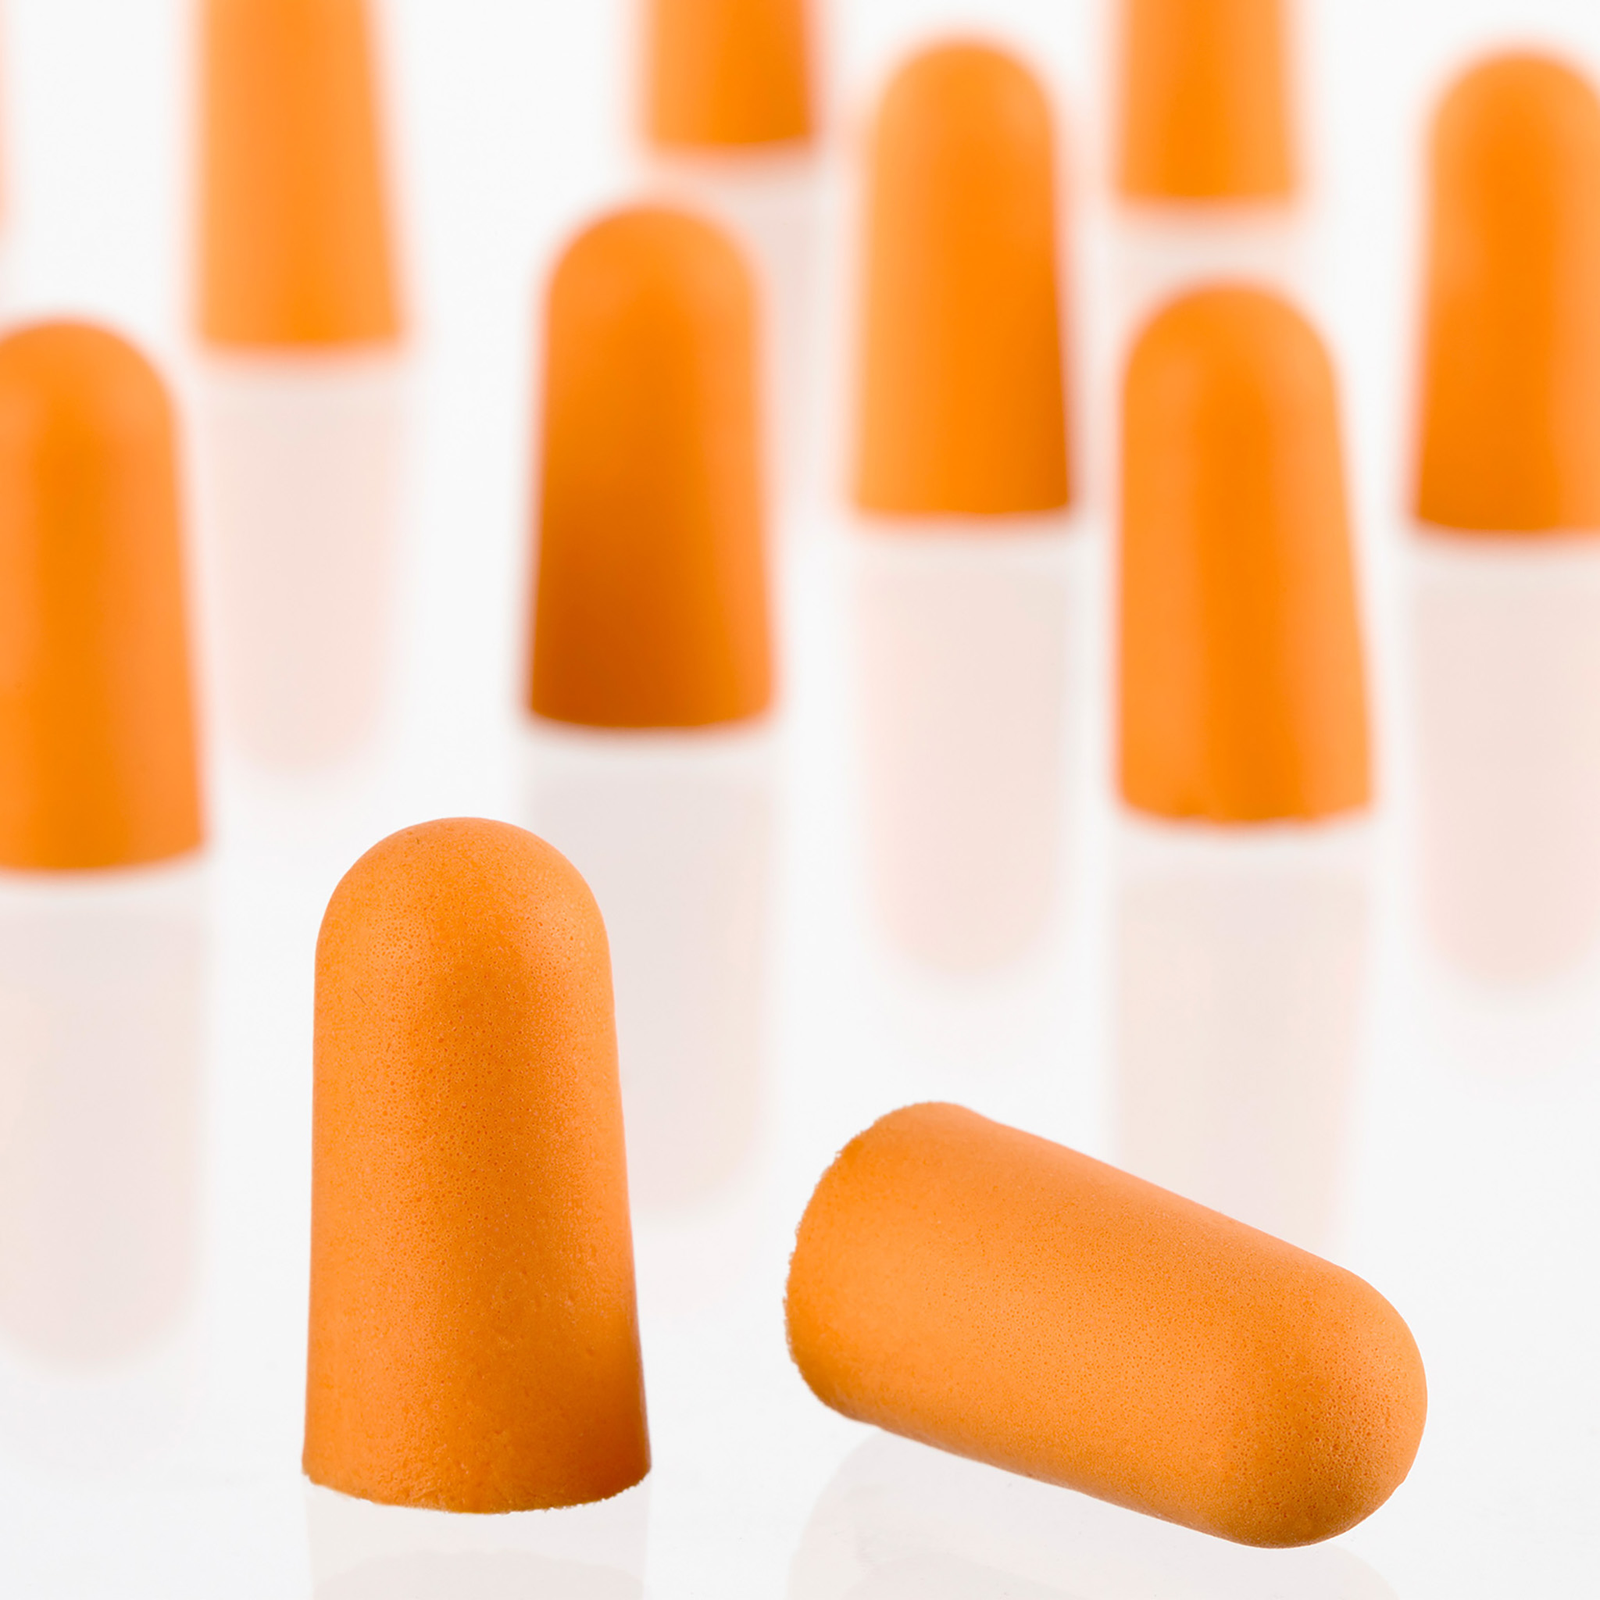 Close up show in detail the soft orange foam of 2 ear plugs. many additional ear plugs can be seen in the background